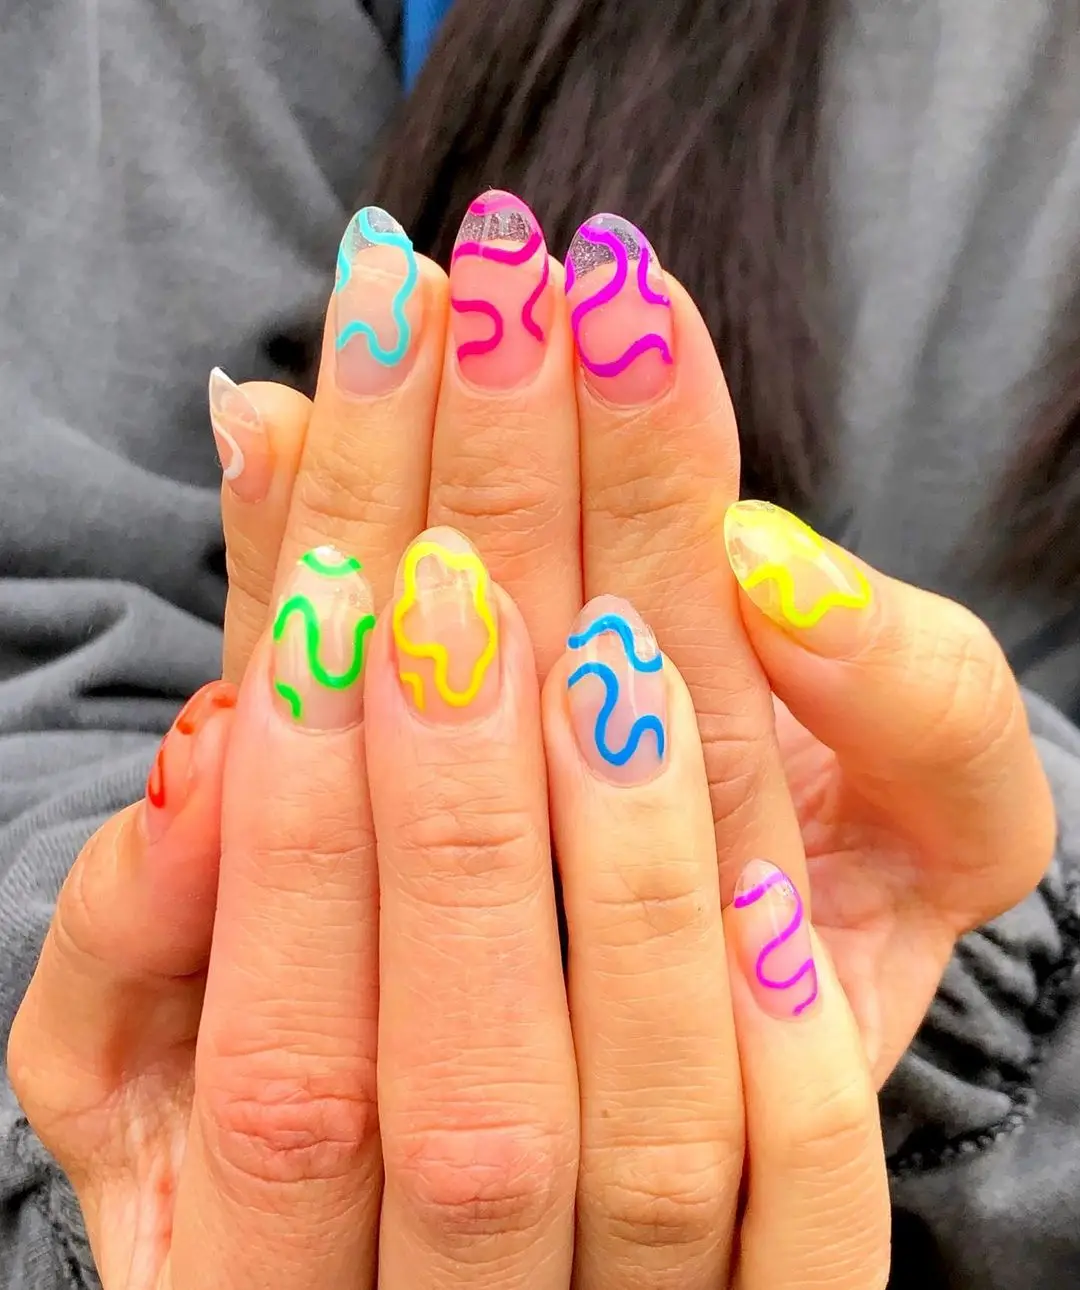 You Wont Believe These Nails Inspired by Popular Memes ...